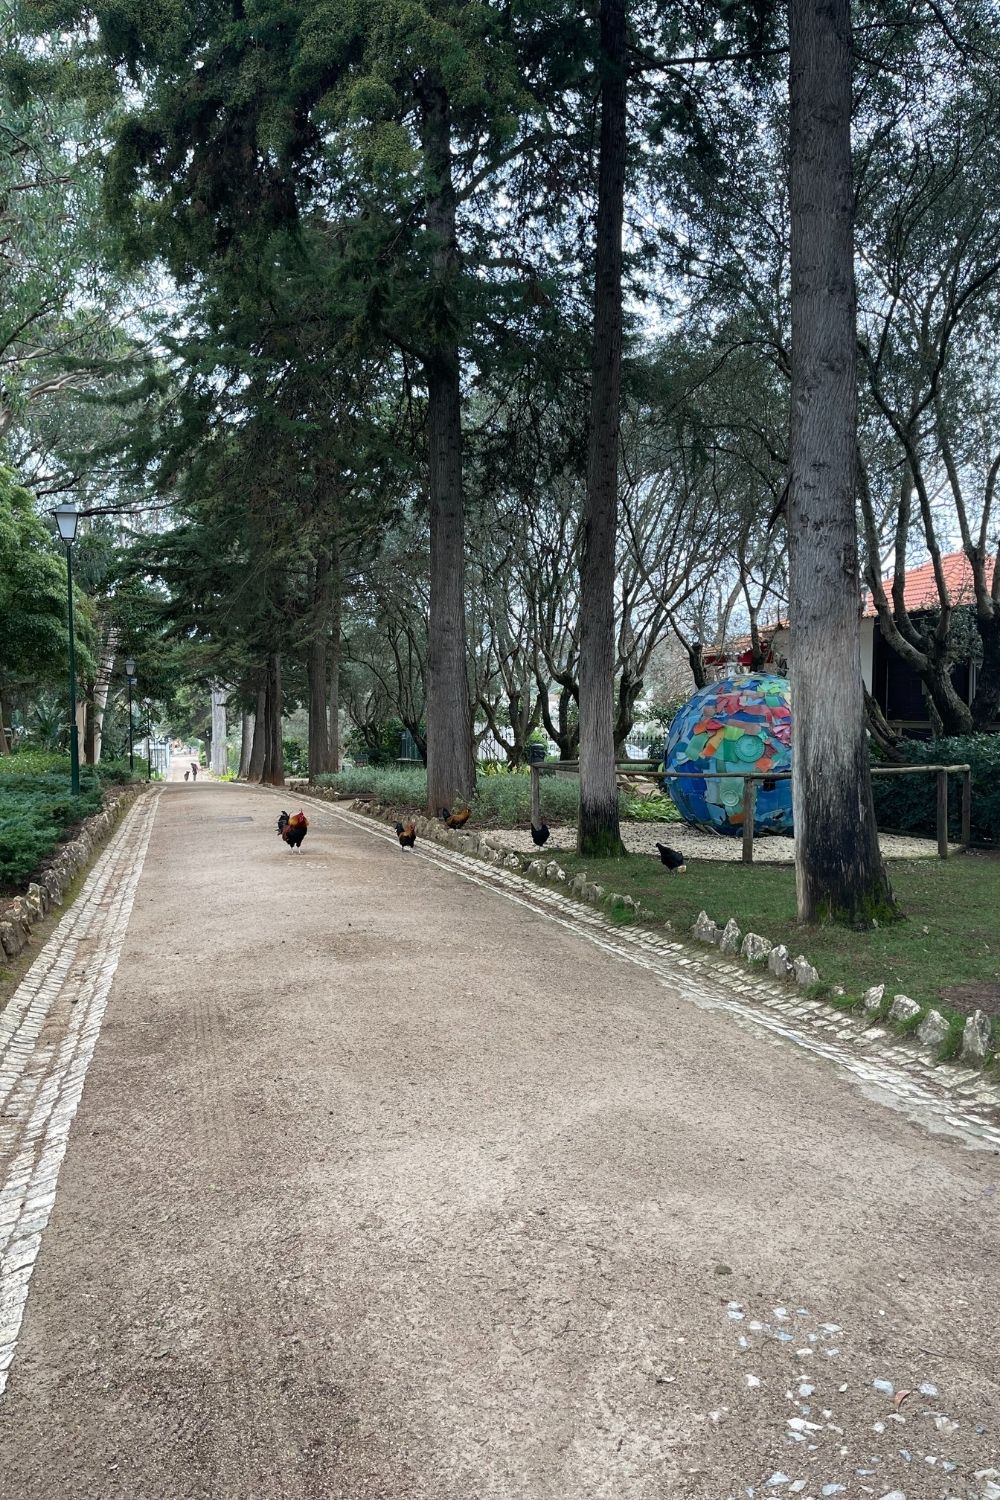 A quaint and quiet cobblestone path meanders through a tranquil park setting, flanked by tall pine trees. A few chickens are seen roaming freely on the path, and there is a colorful globe-shaped sculpture visible in the background on the right, adding an artistic touch to the natural surroundings.